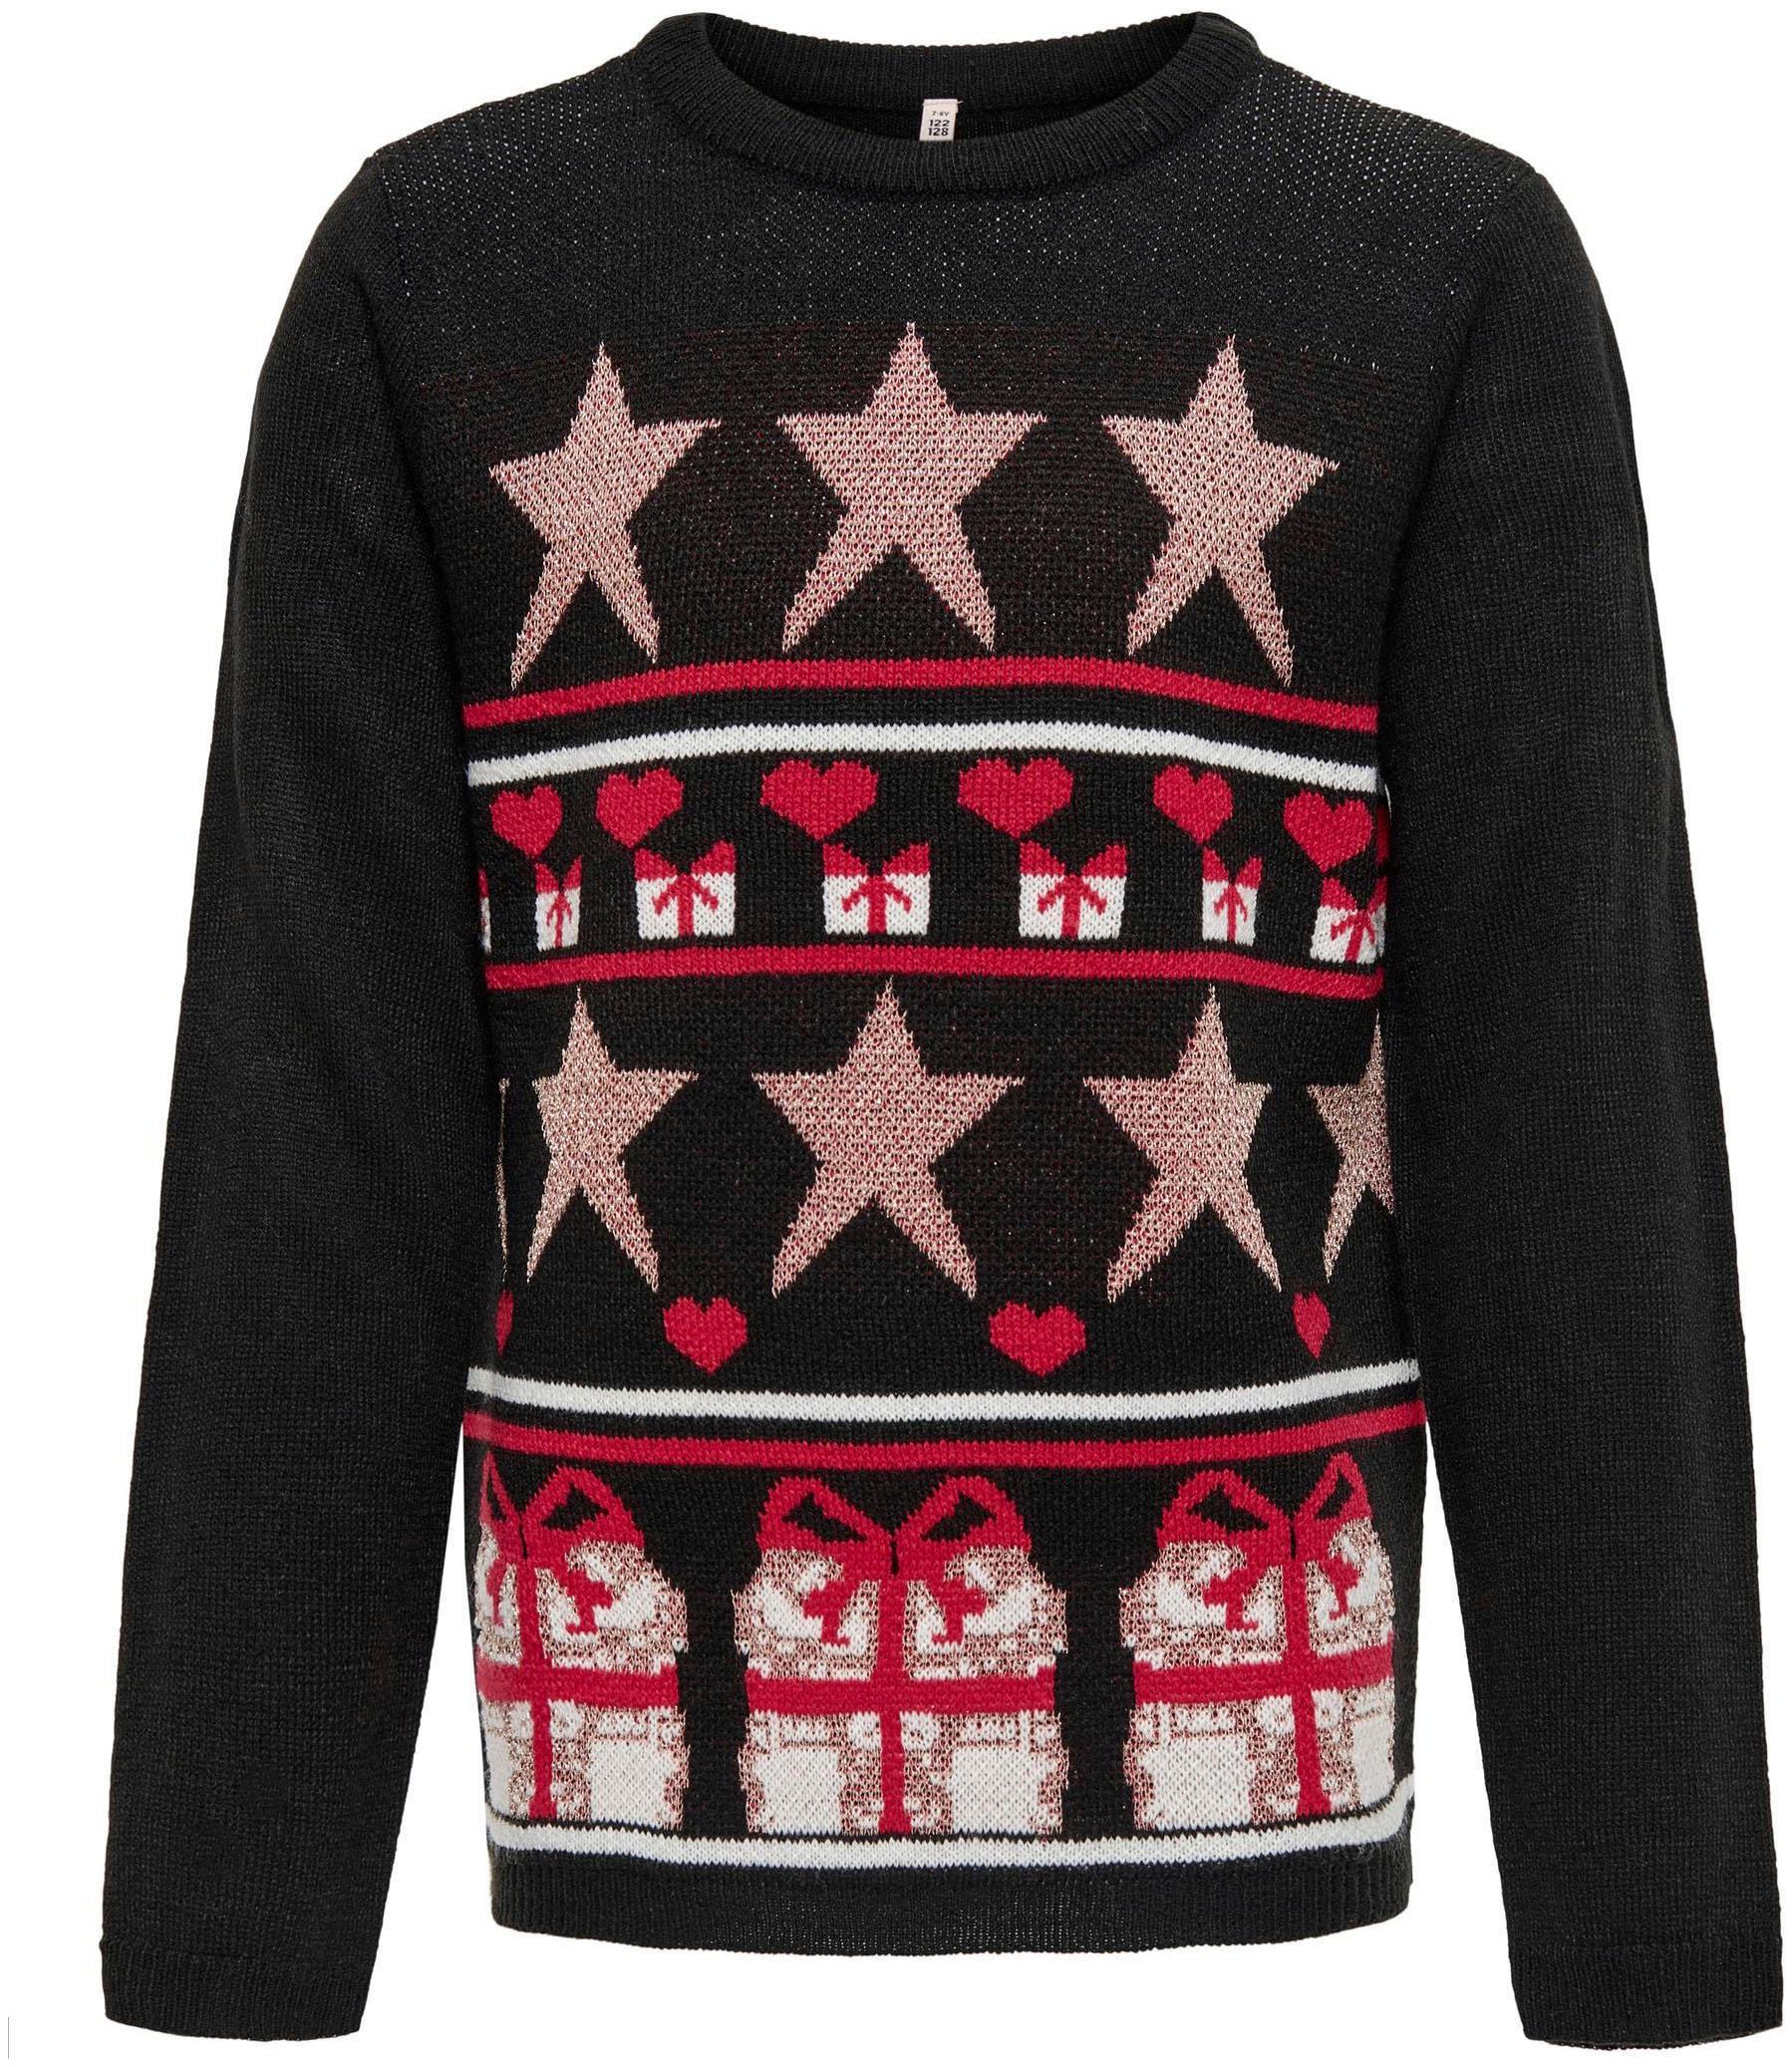 L/S ONLY bei KIDS »KOGXMAS WRAP PULLOVER« ♕ Strickpullover